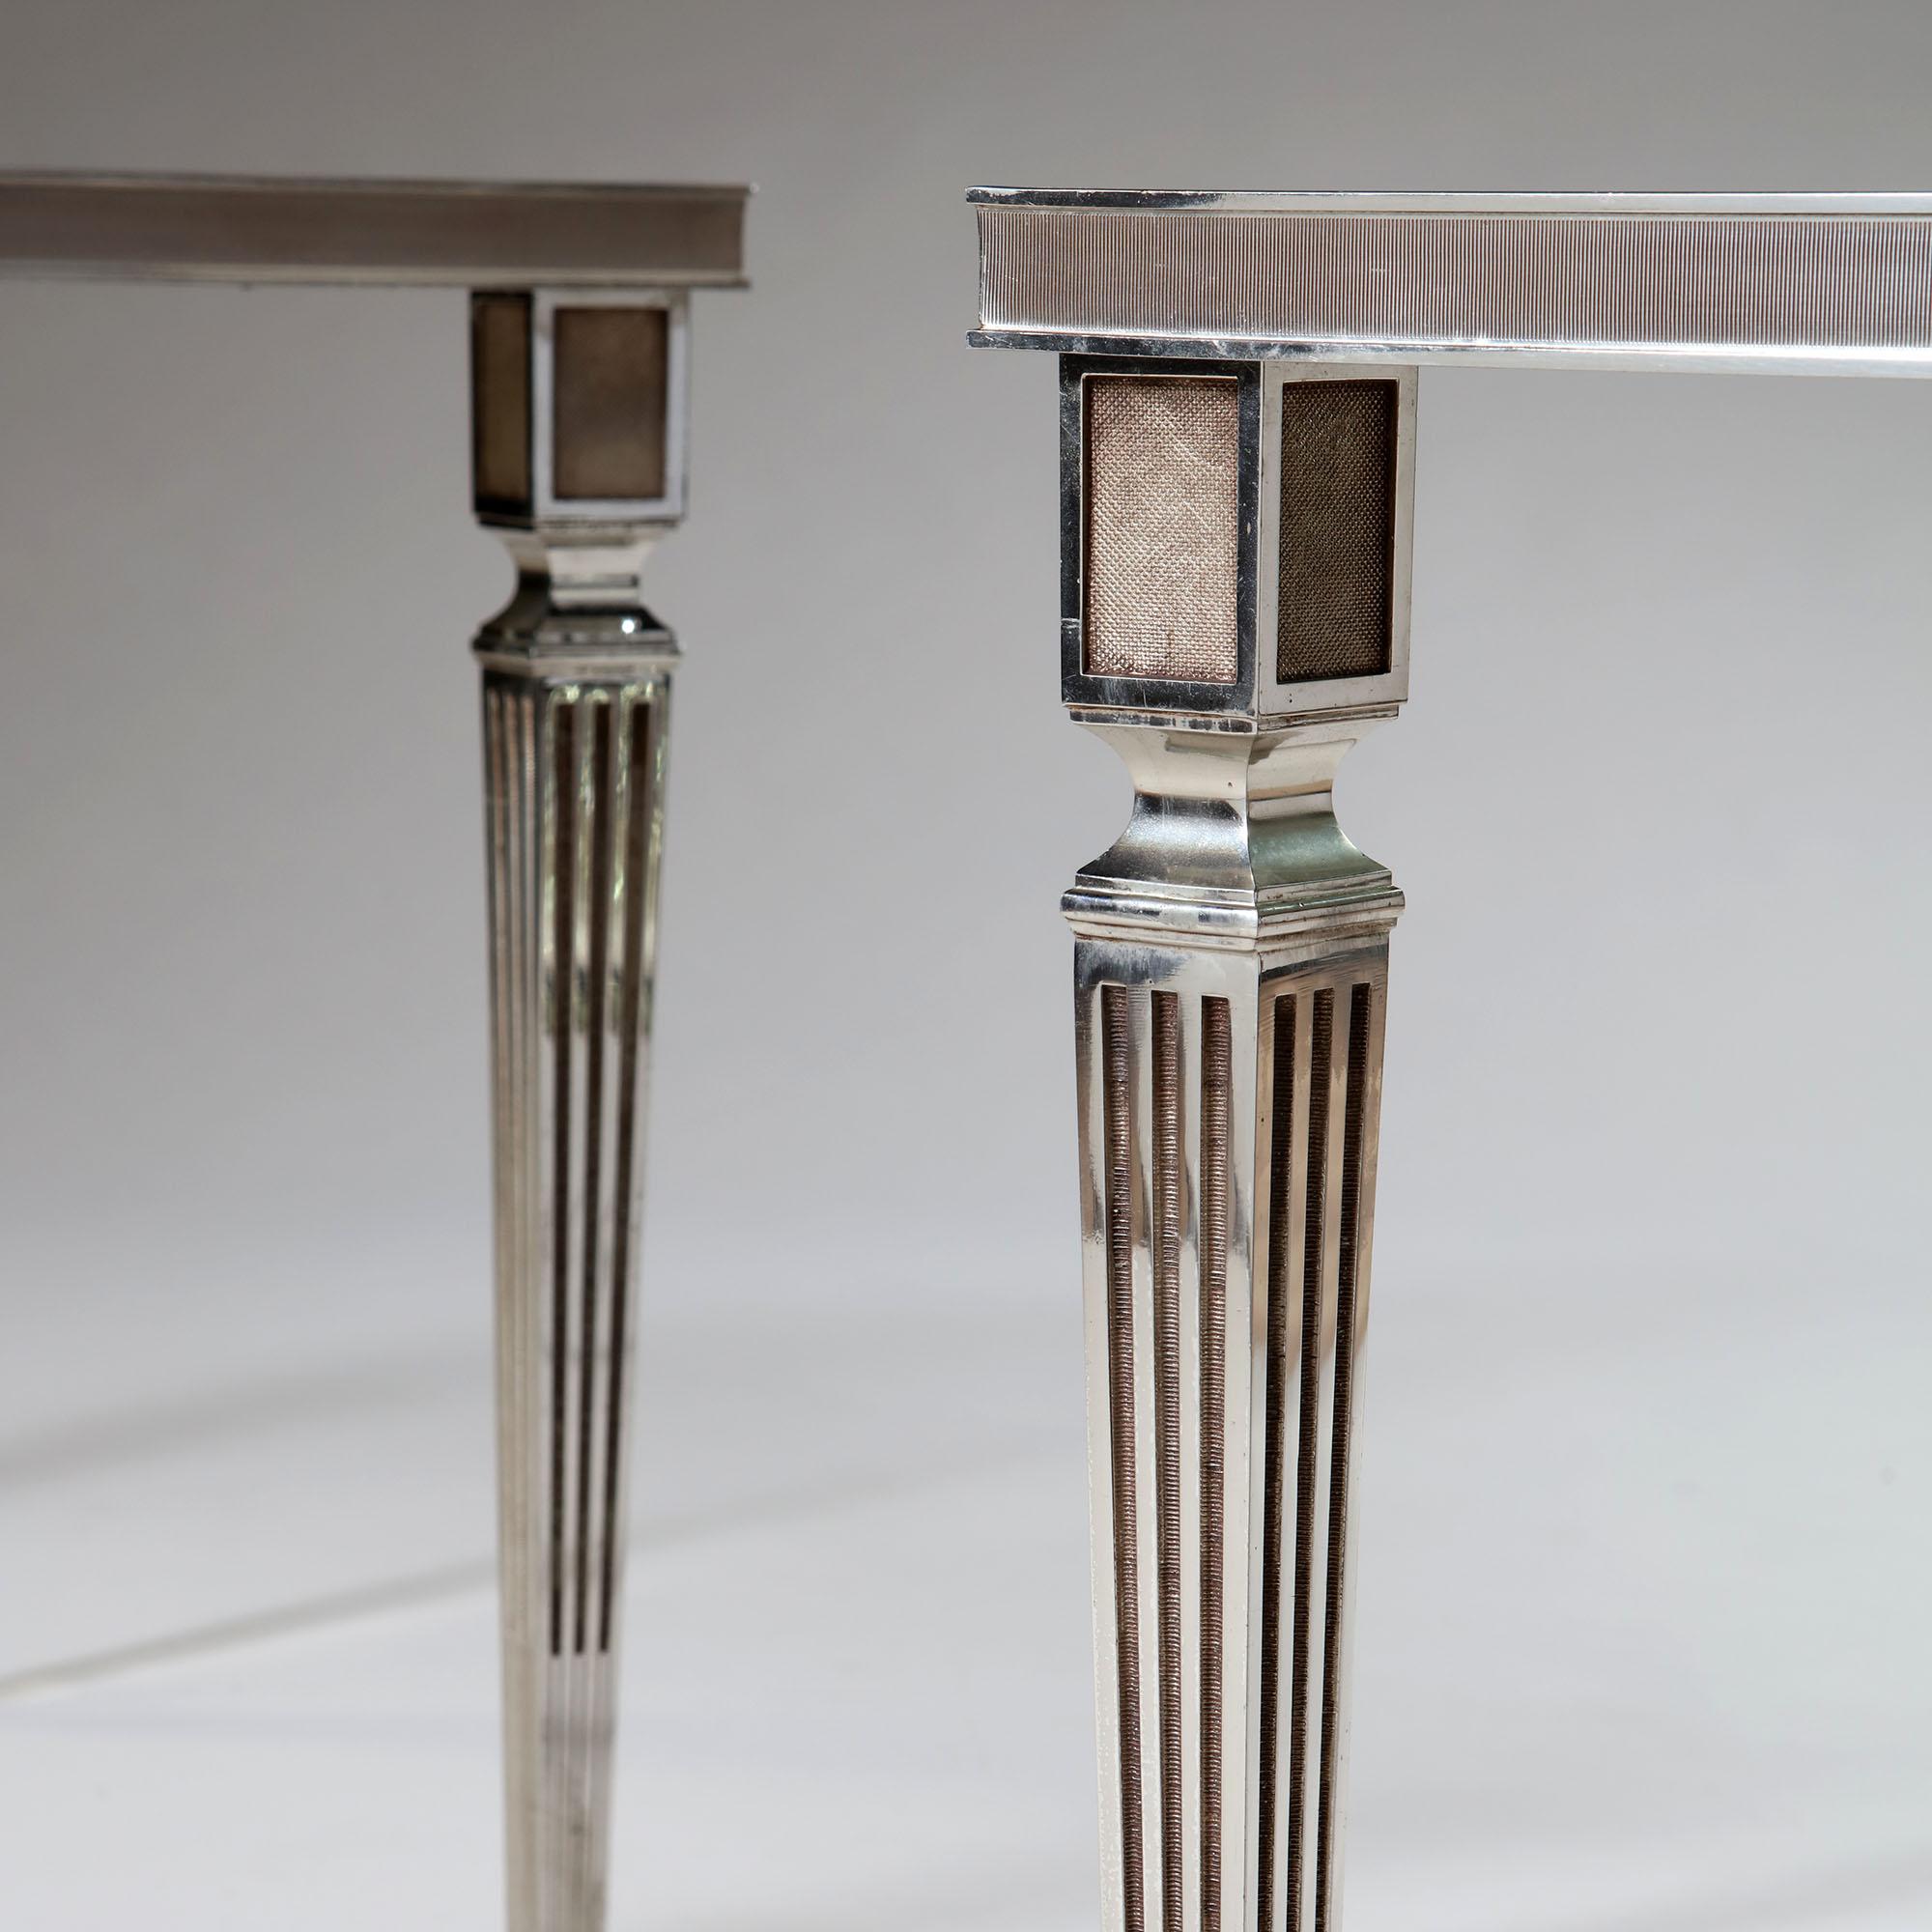 A fine pair of square silver plated occasional tables, retaining the original smoked glass tops (with minor losses to the corners), all supported on fluted legs in the Neoclassical style with toupie feet.

Jean-Henri Jansen, originally from Denmark,